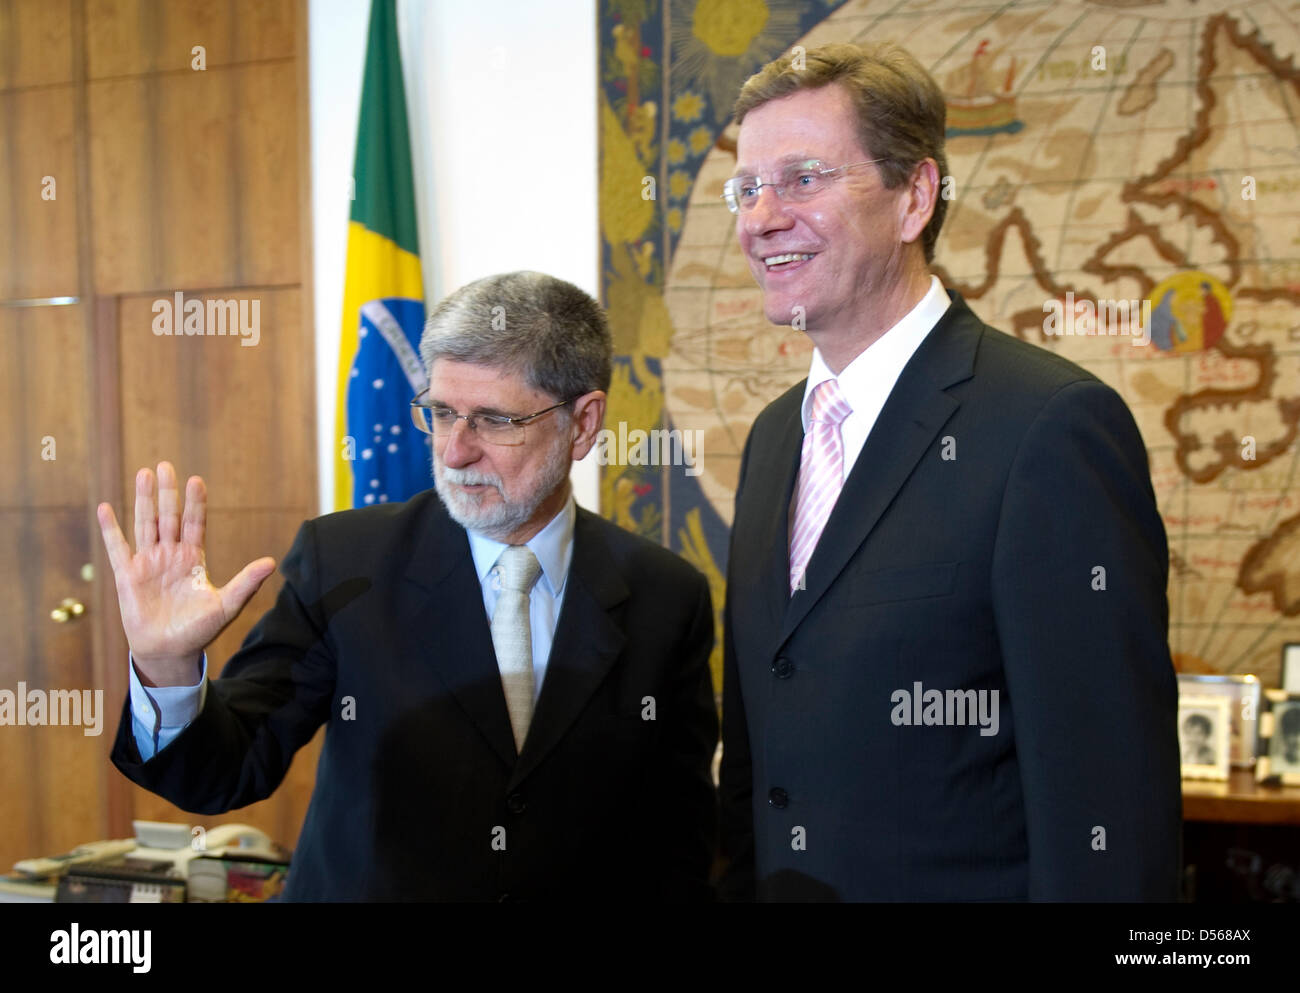 German Foreign Minister Guido Westerwelle (R) and his Brazilian counterpart Celso Luiz Nunes Amorim meet for talks in Brasilia, Brazil, 10 March 2010. Westerwelle is on his so far longest journey abroad, paying visits to Chile, Argentina, Uruguay and Brazil. Photo: ARNO BURGI Stock Photo